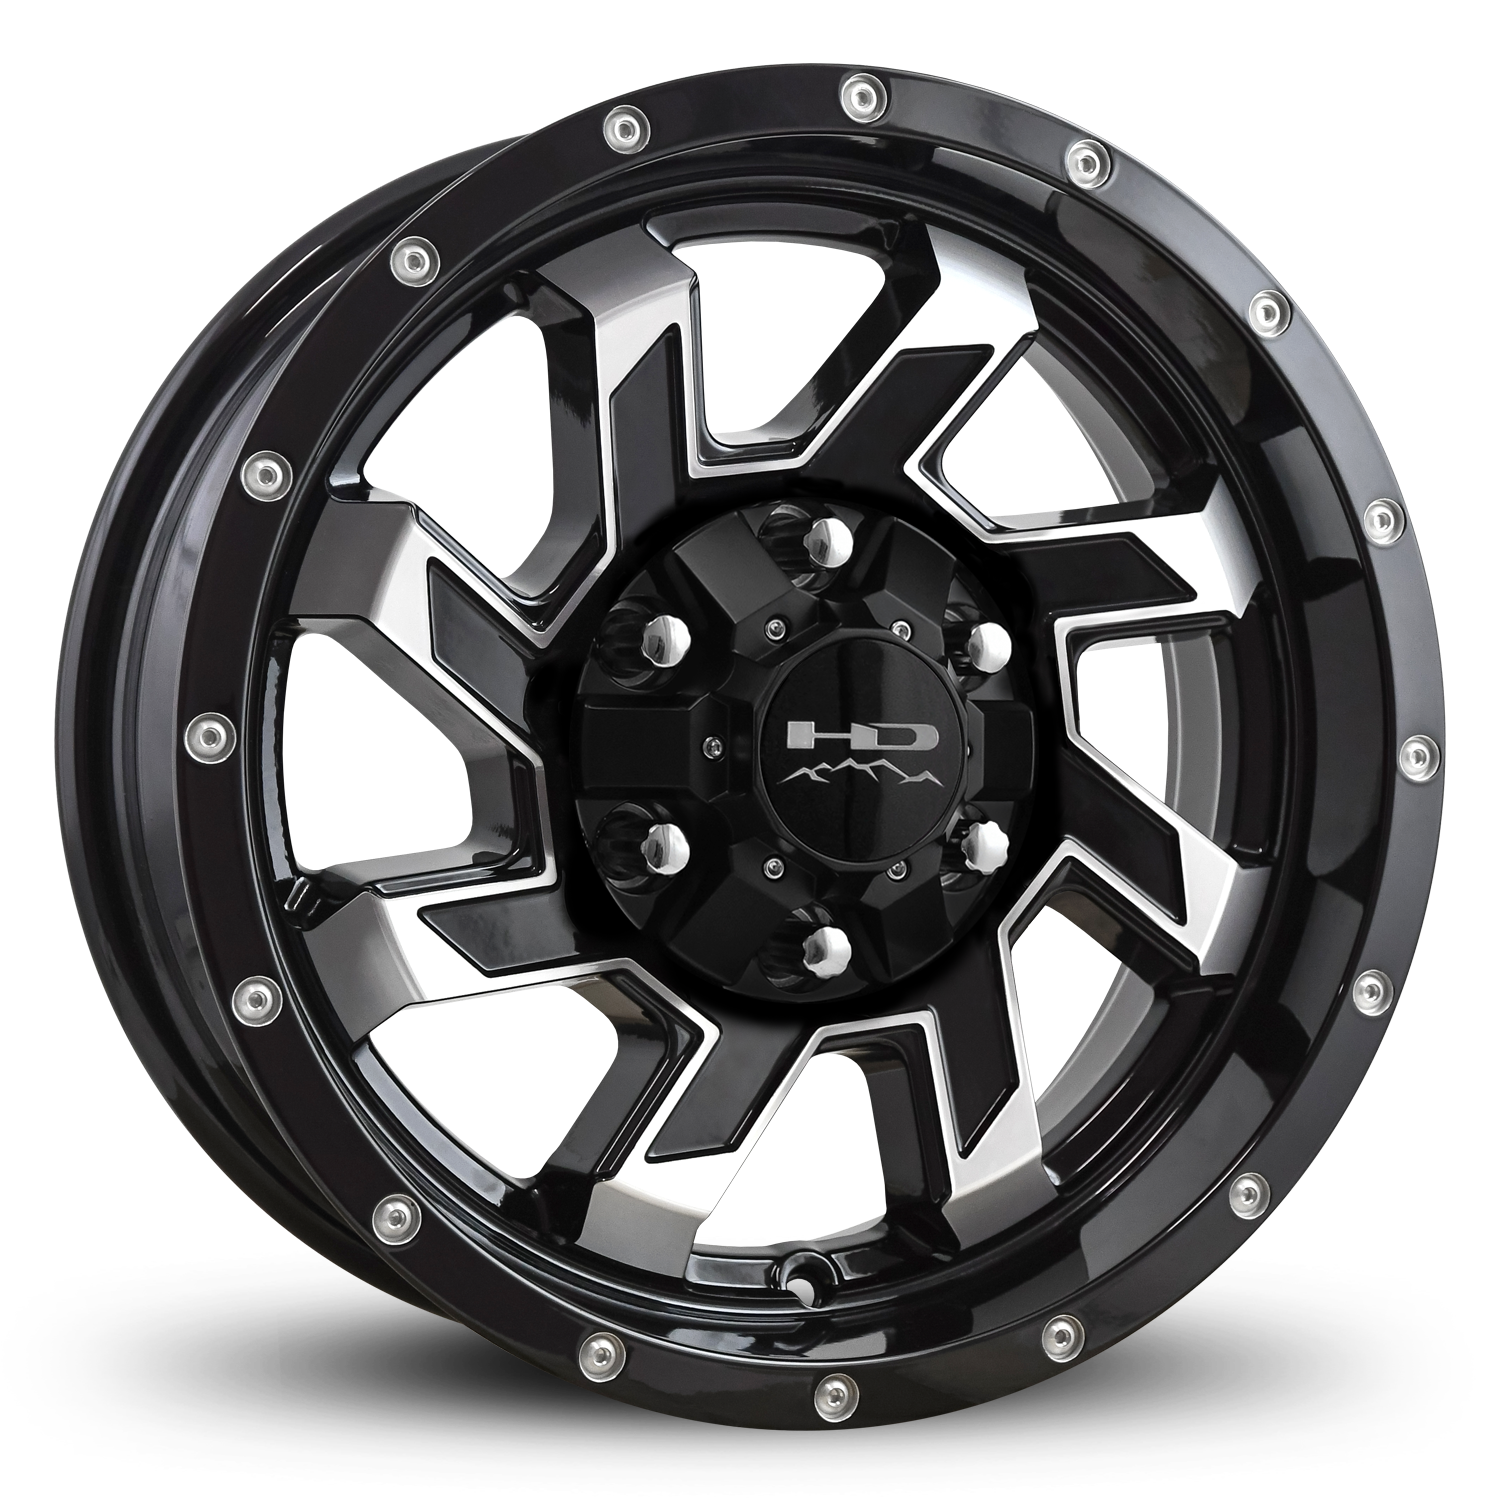 HD Off-Road SAW Custom Trailer Wheels in 15x6.0 in 6 lug Gloss Black Machined Face for Unility, Boat, Car, Construction, Horse, & RV